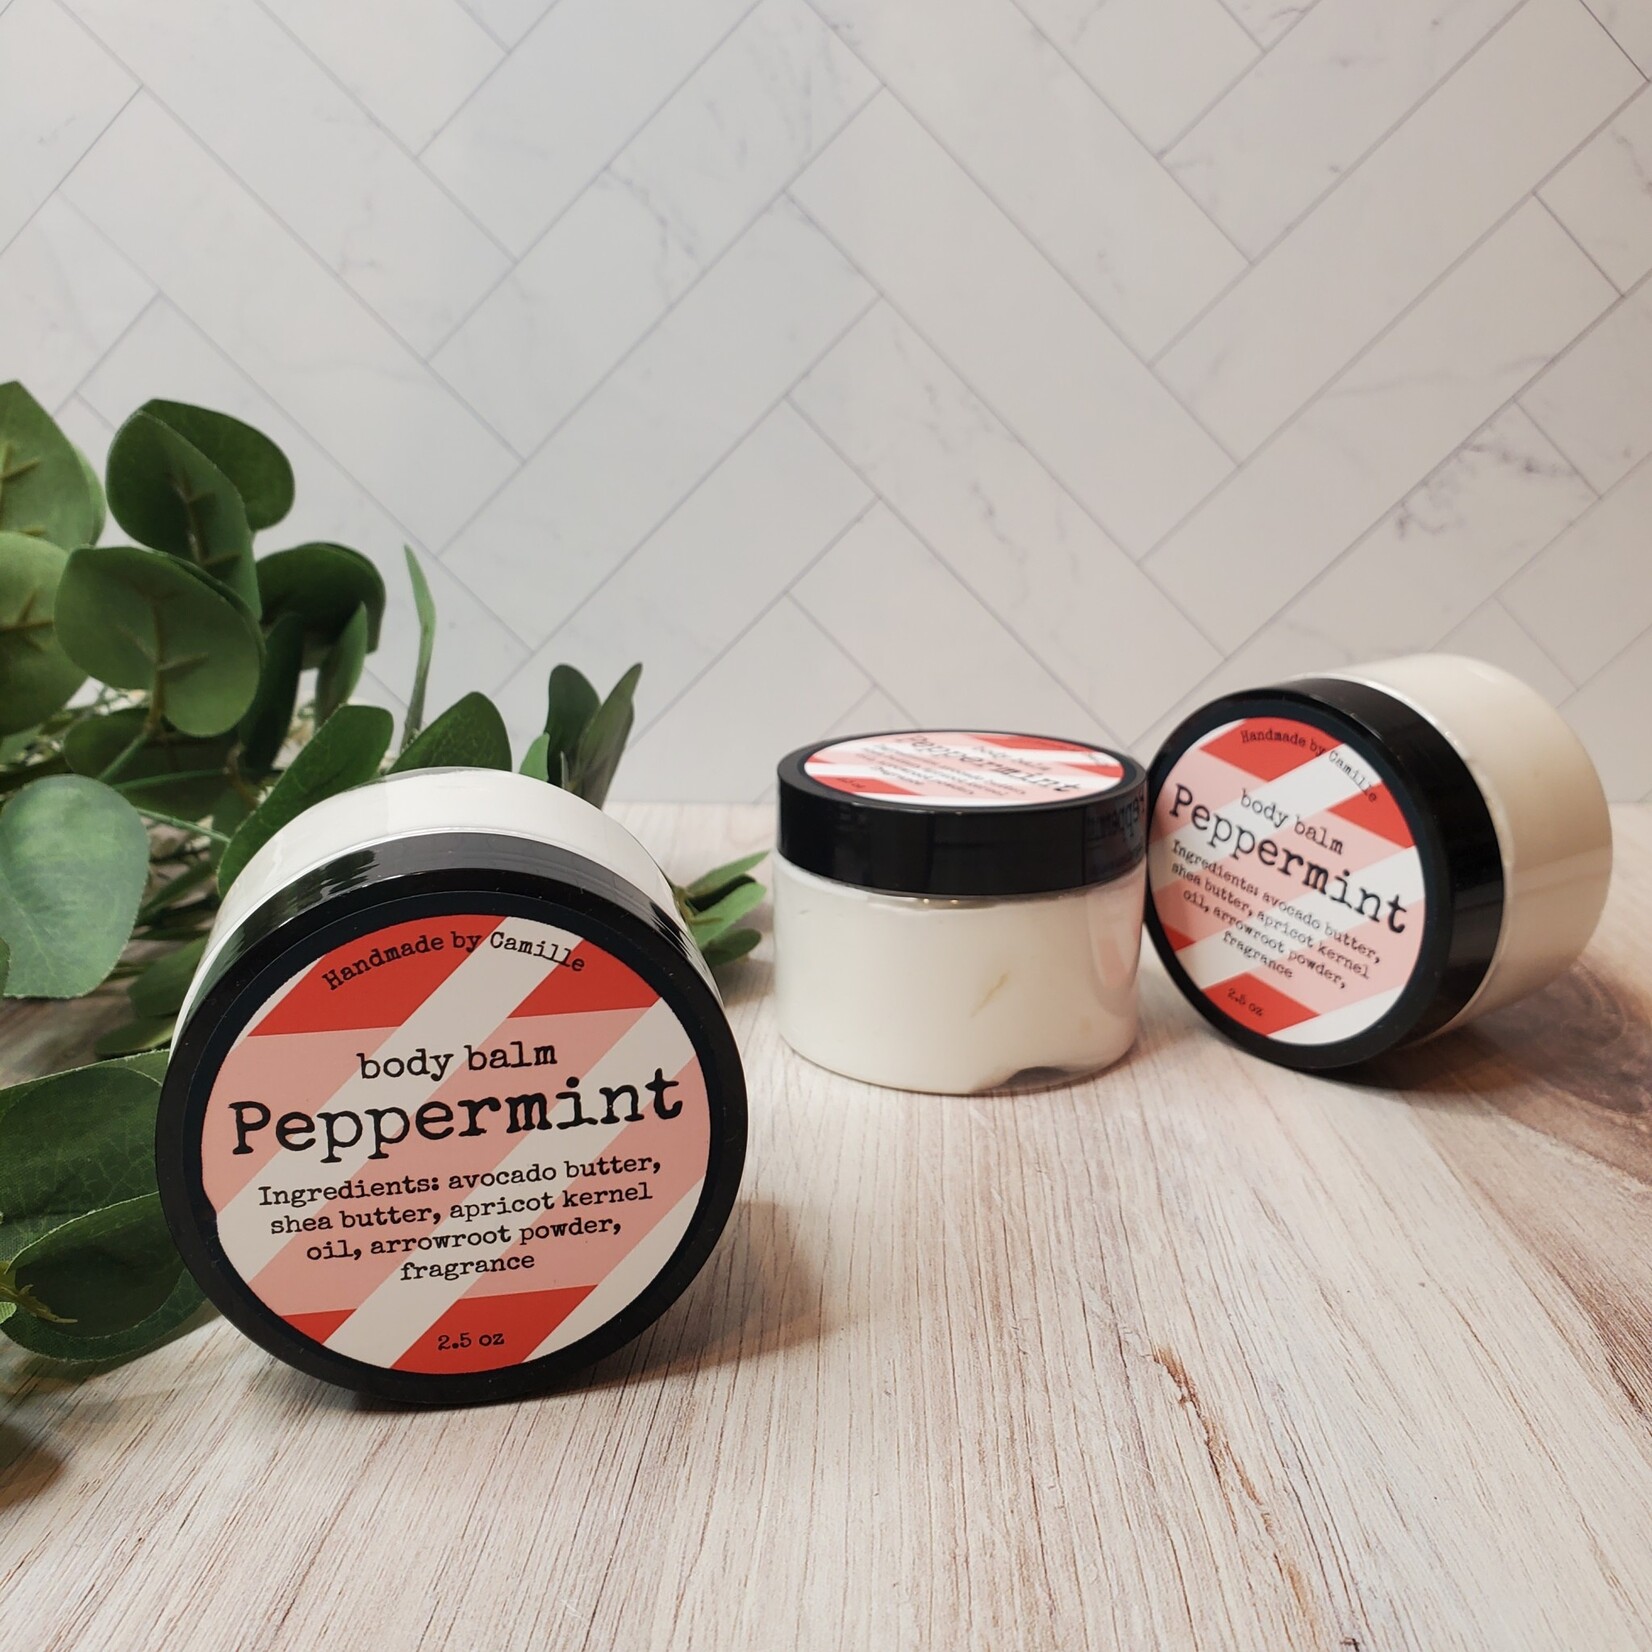 Handmade by Camille Peppermint Body Balm